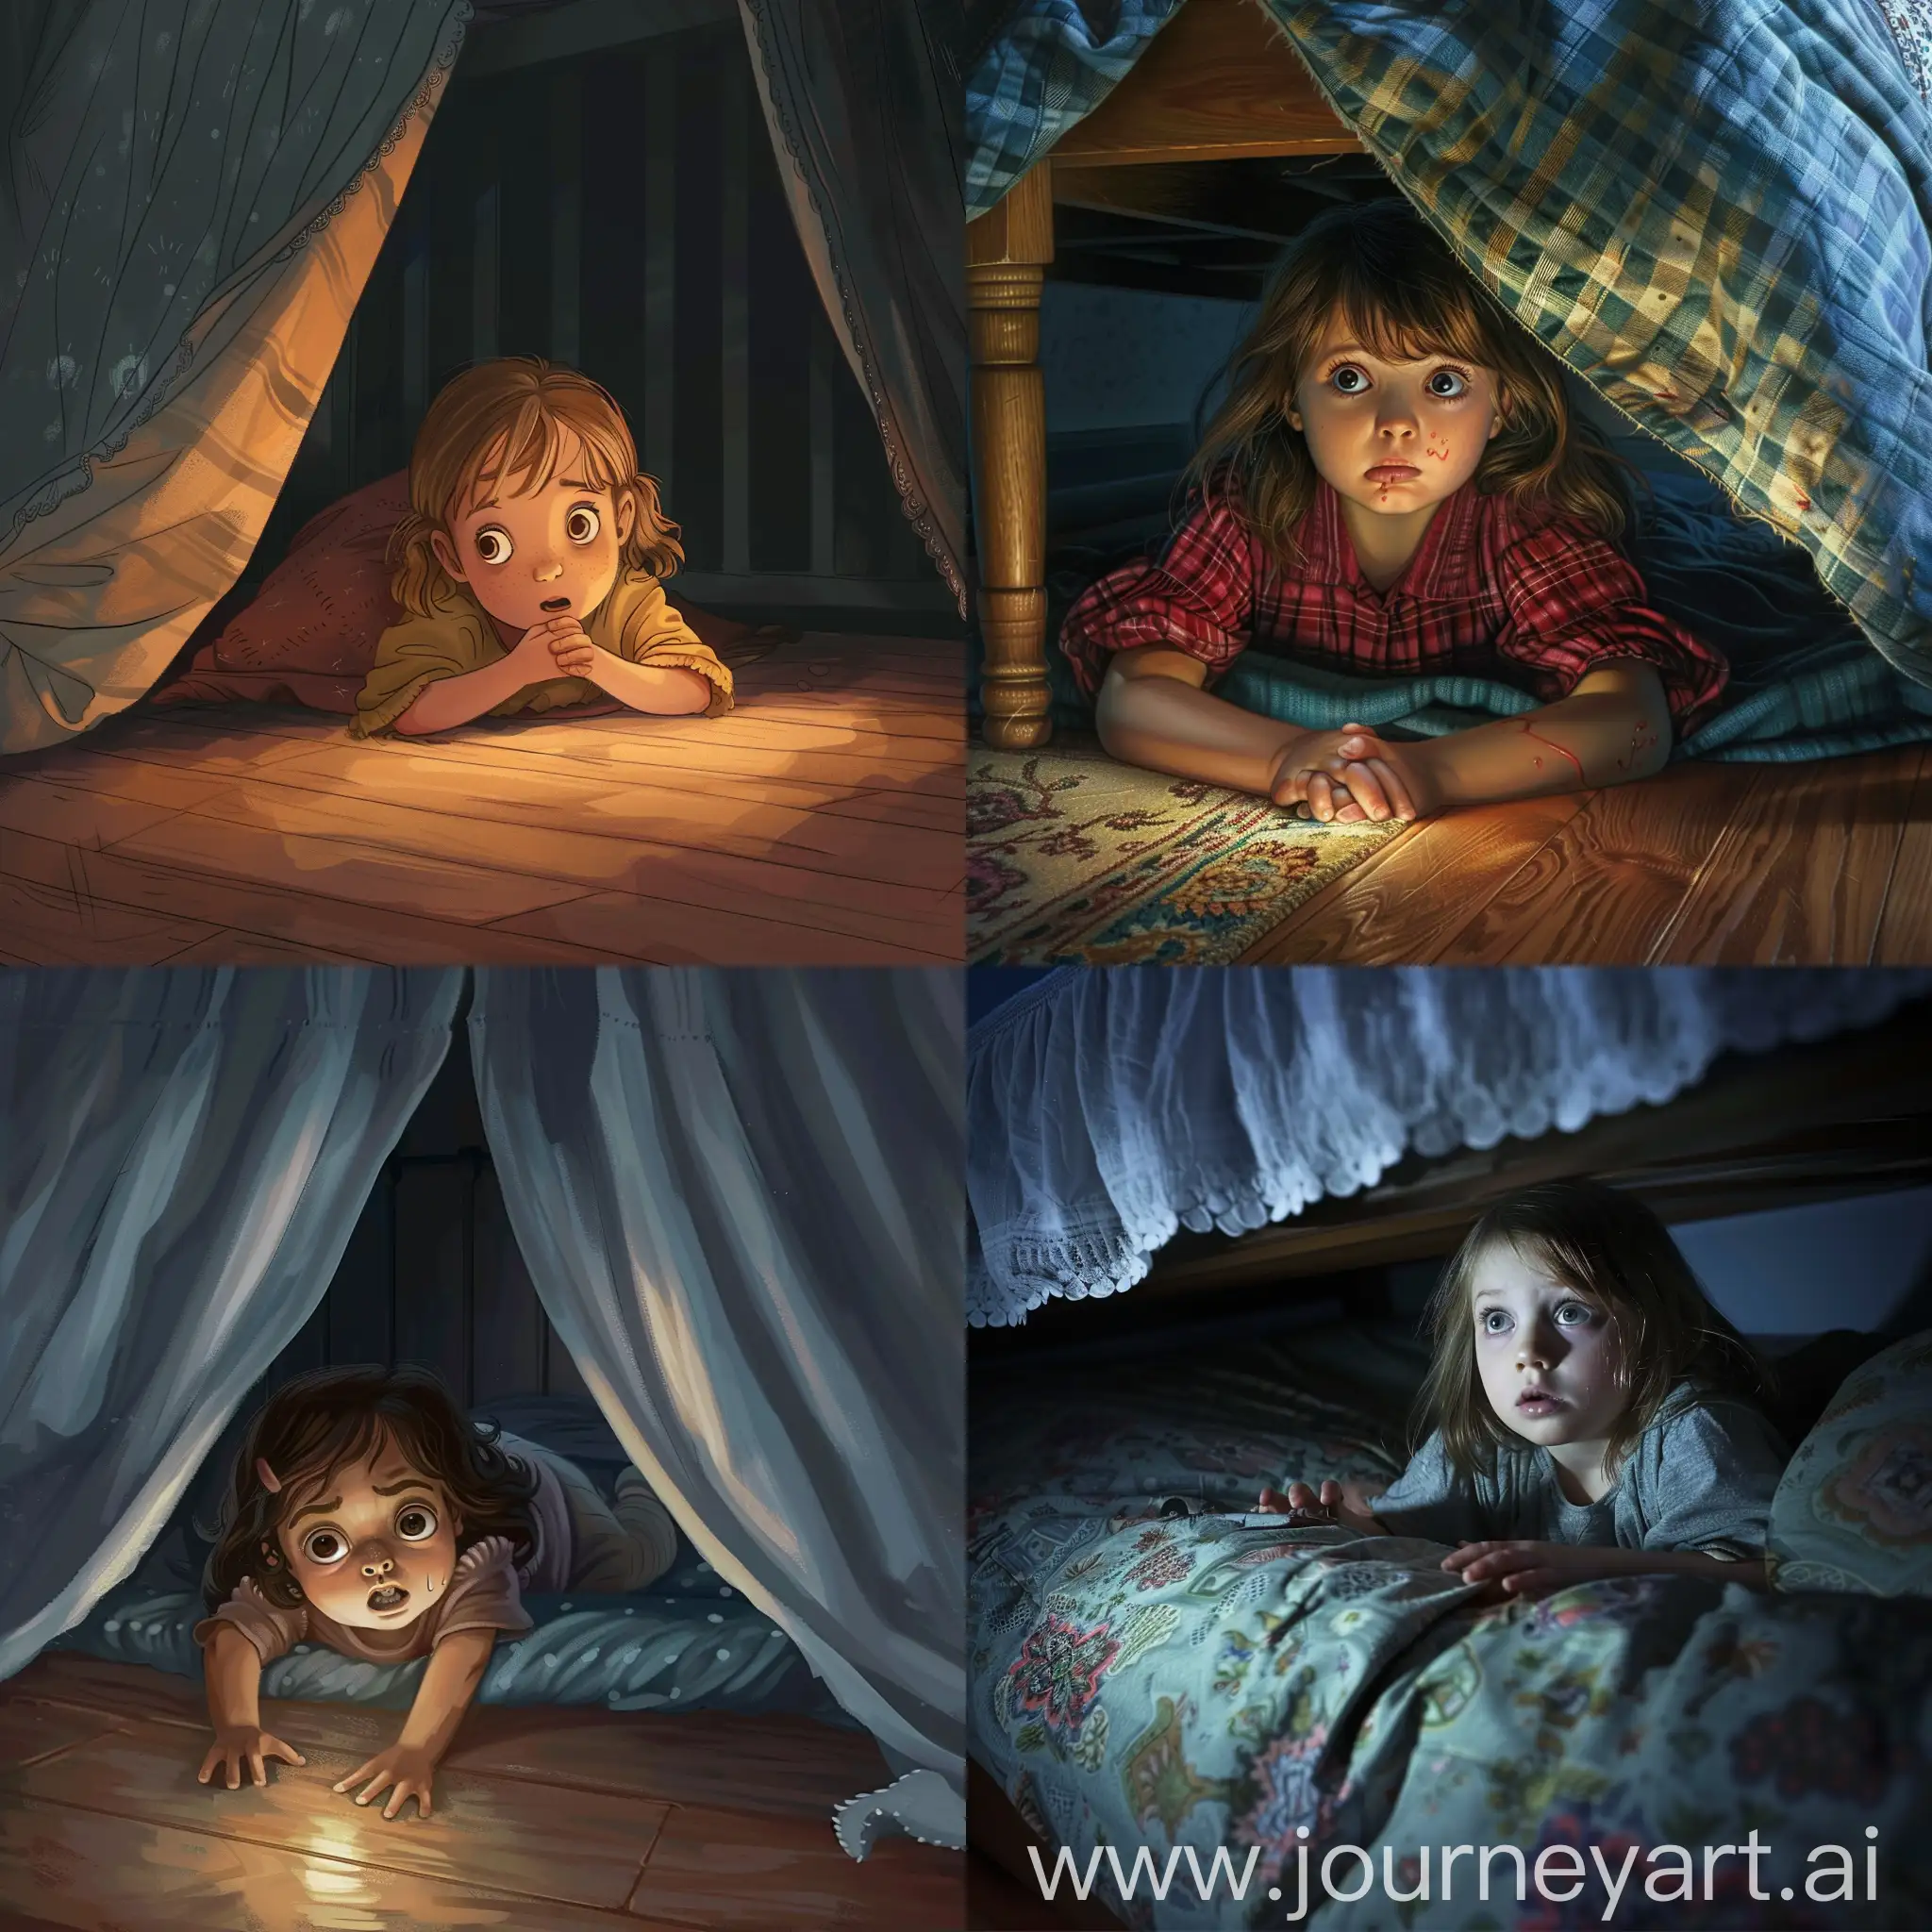 Brave-Little-Girl-Confronting-Bedtime-Fears